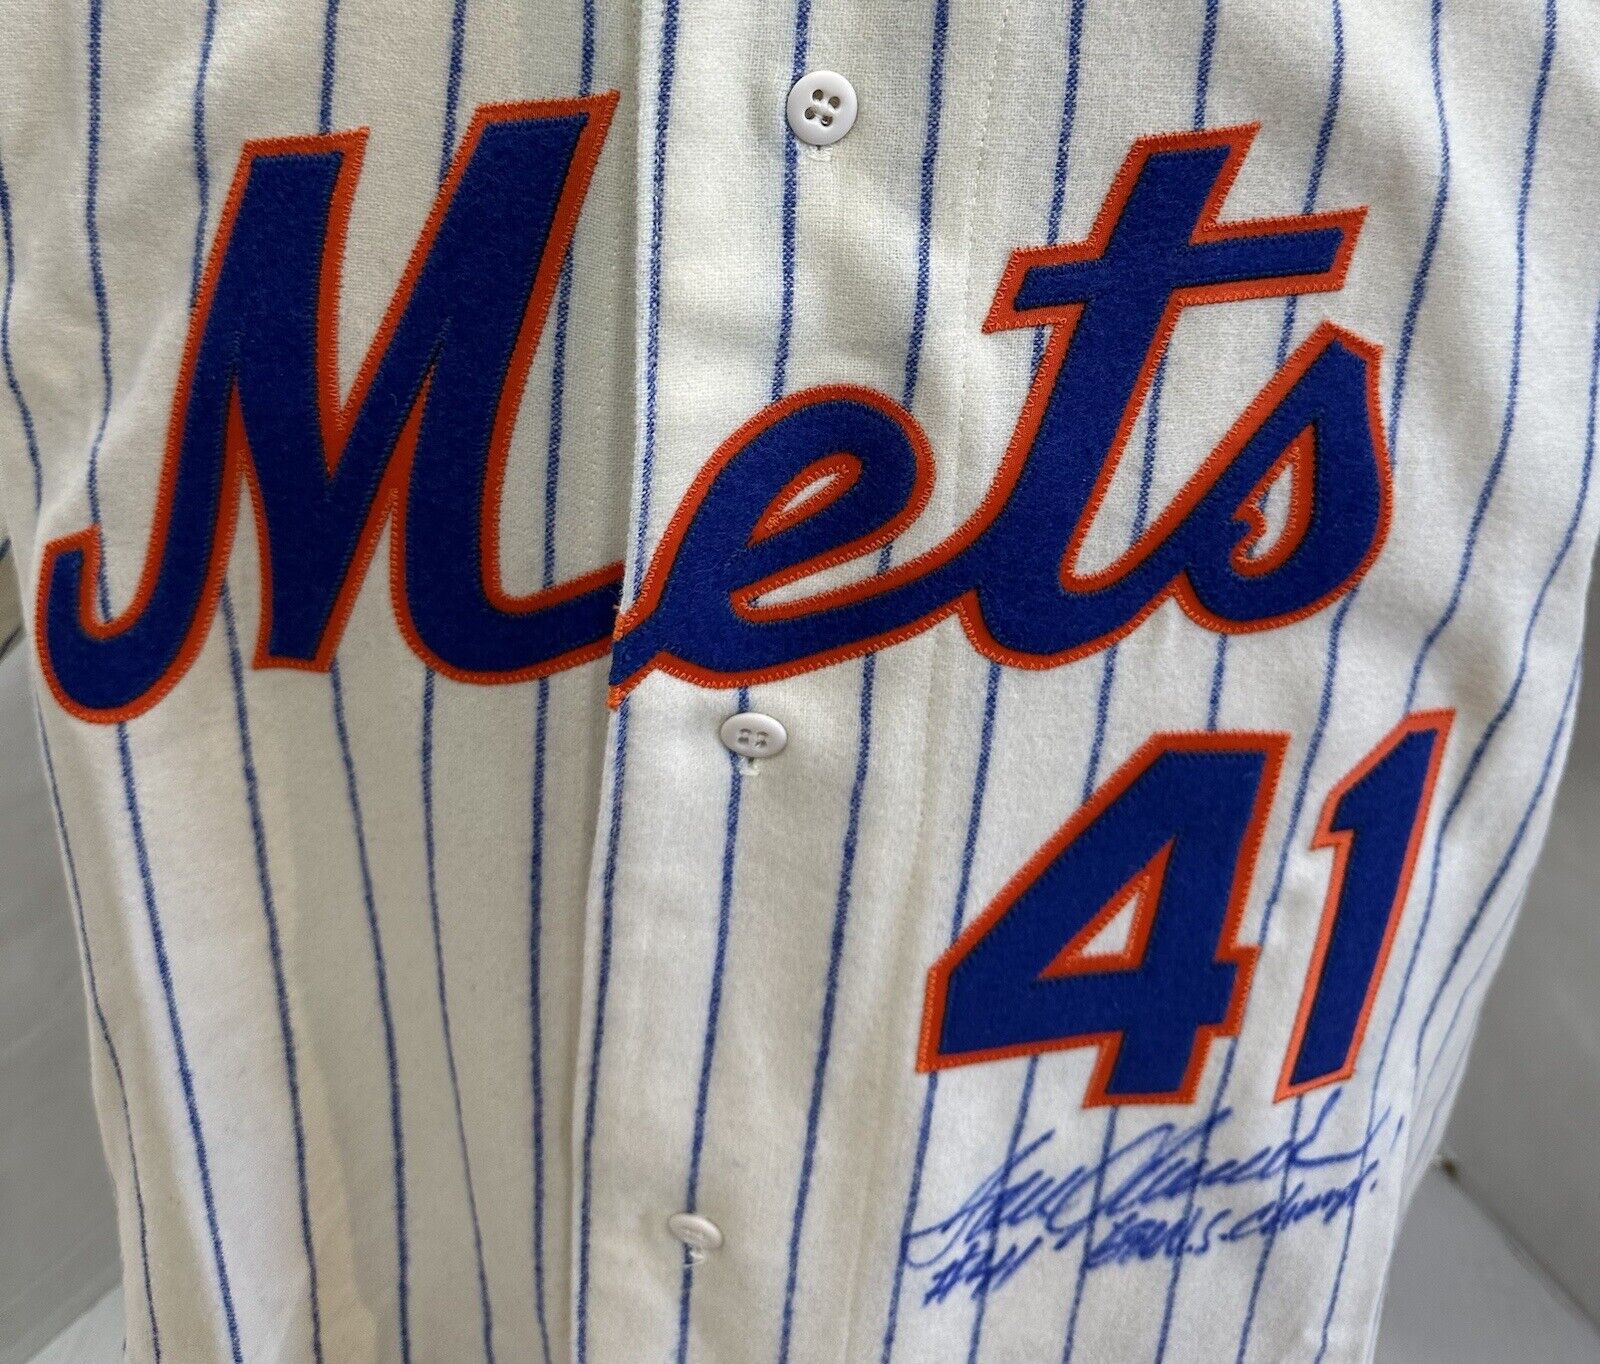 Tom Seaver Signed Mitchell & Ness Authentic Mets Jersey 1969 WS Auto S –  CollectibleXchange